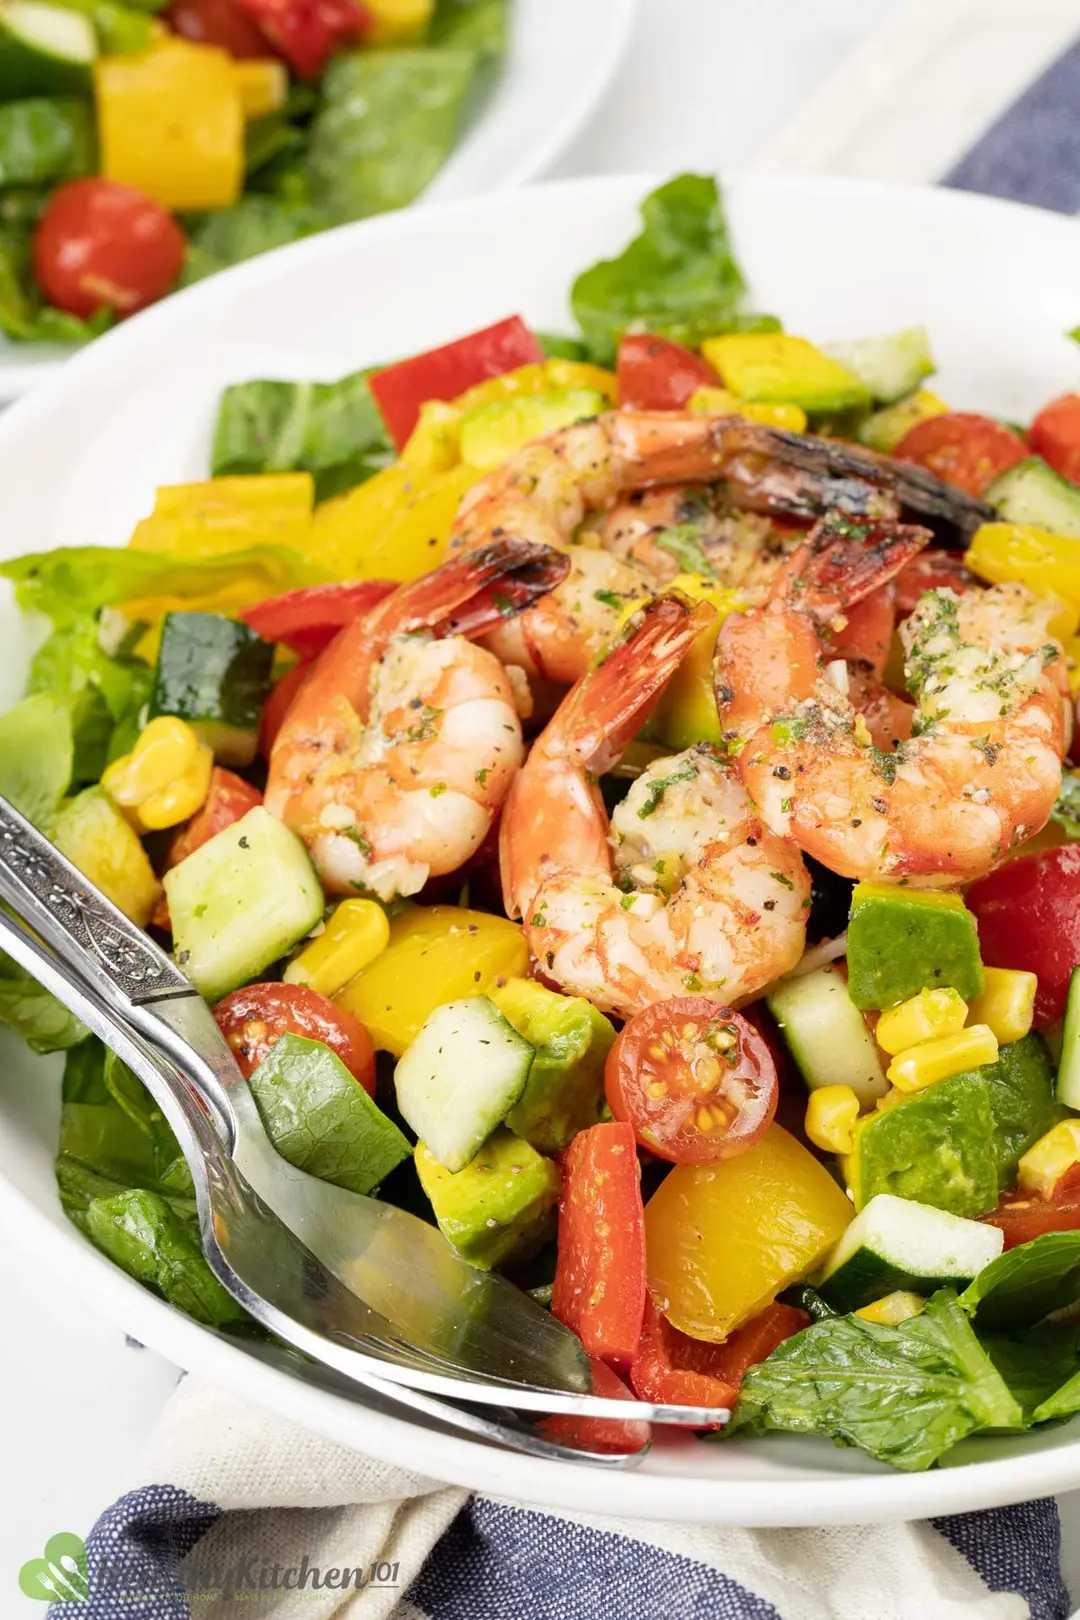 What to Serve With Shrimp Salad